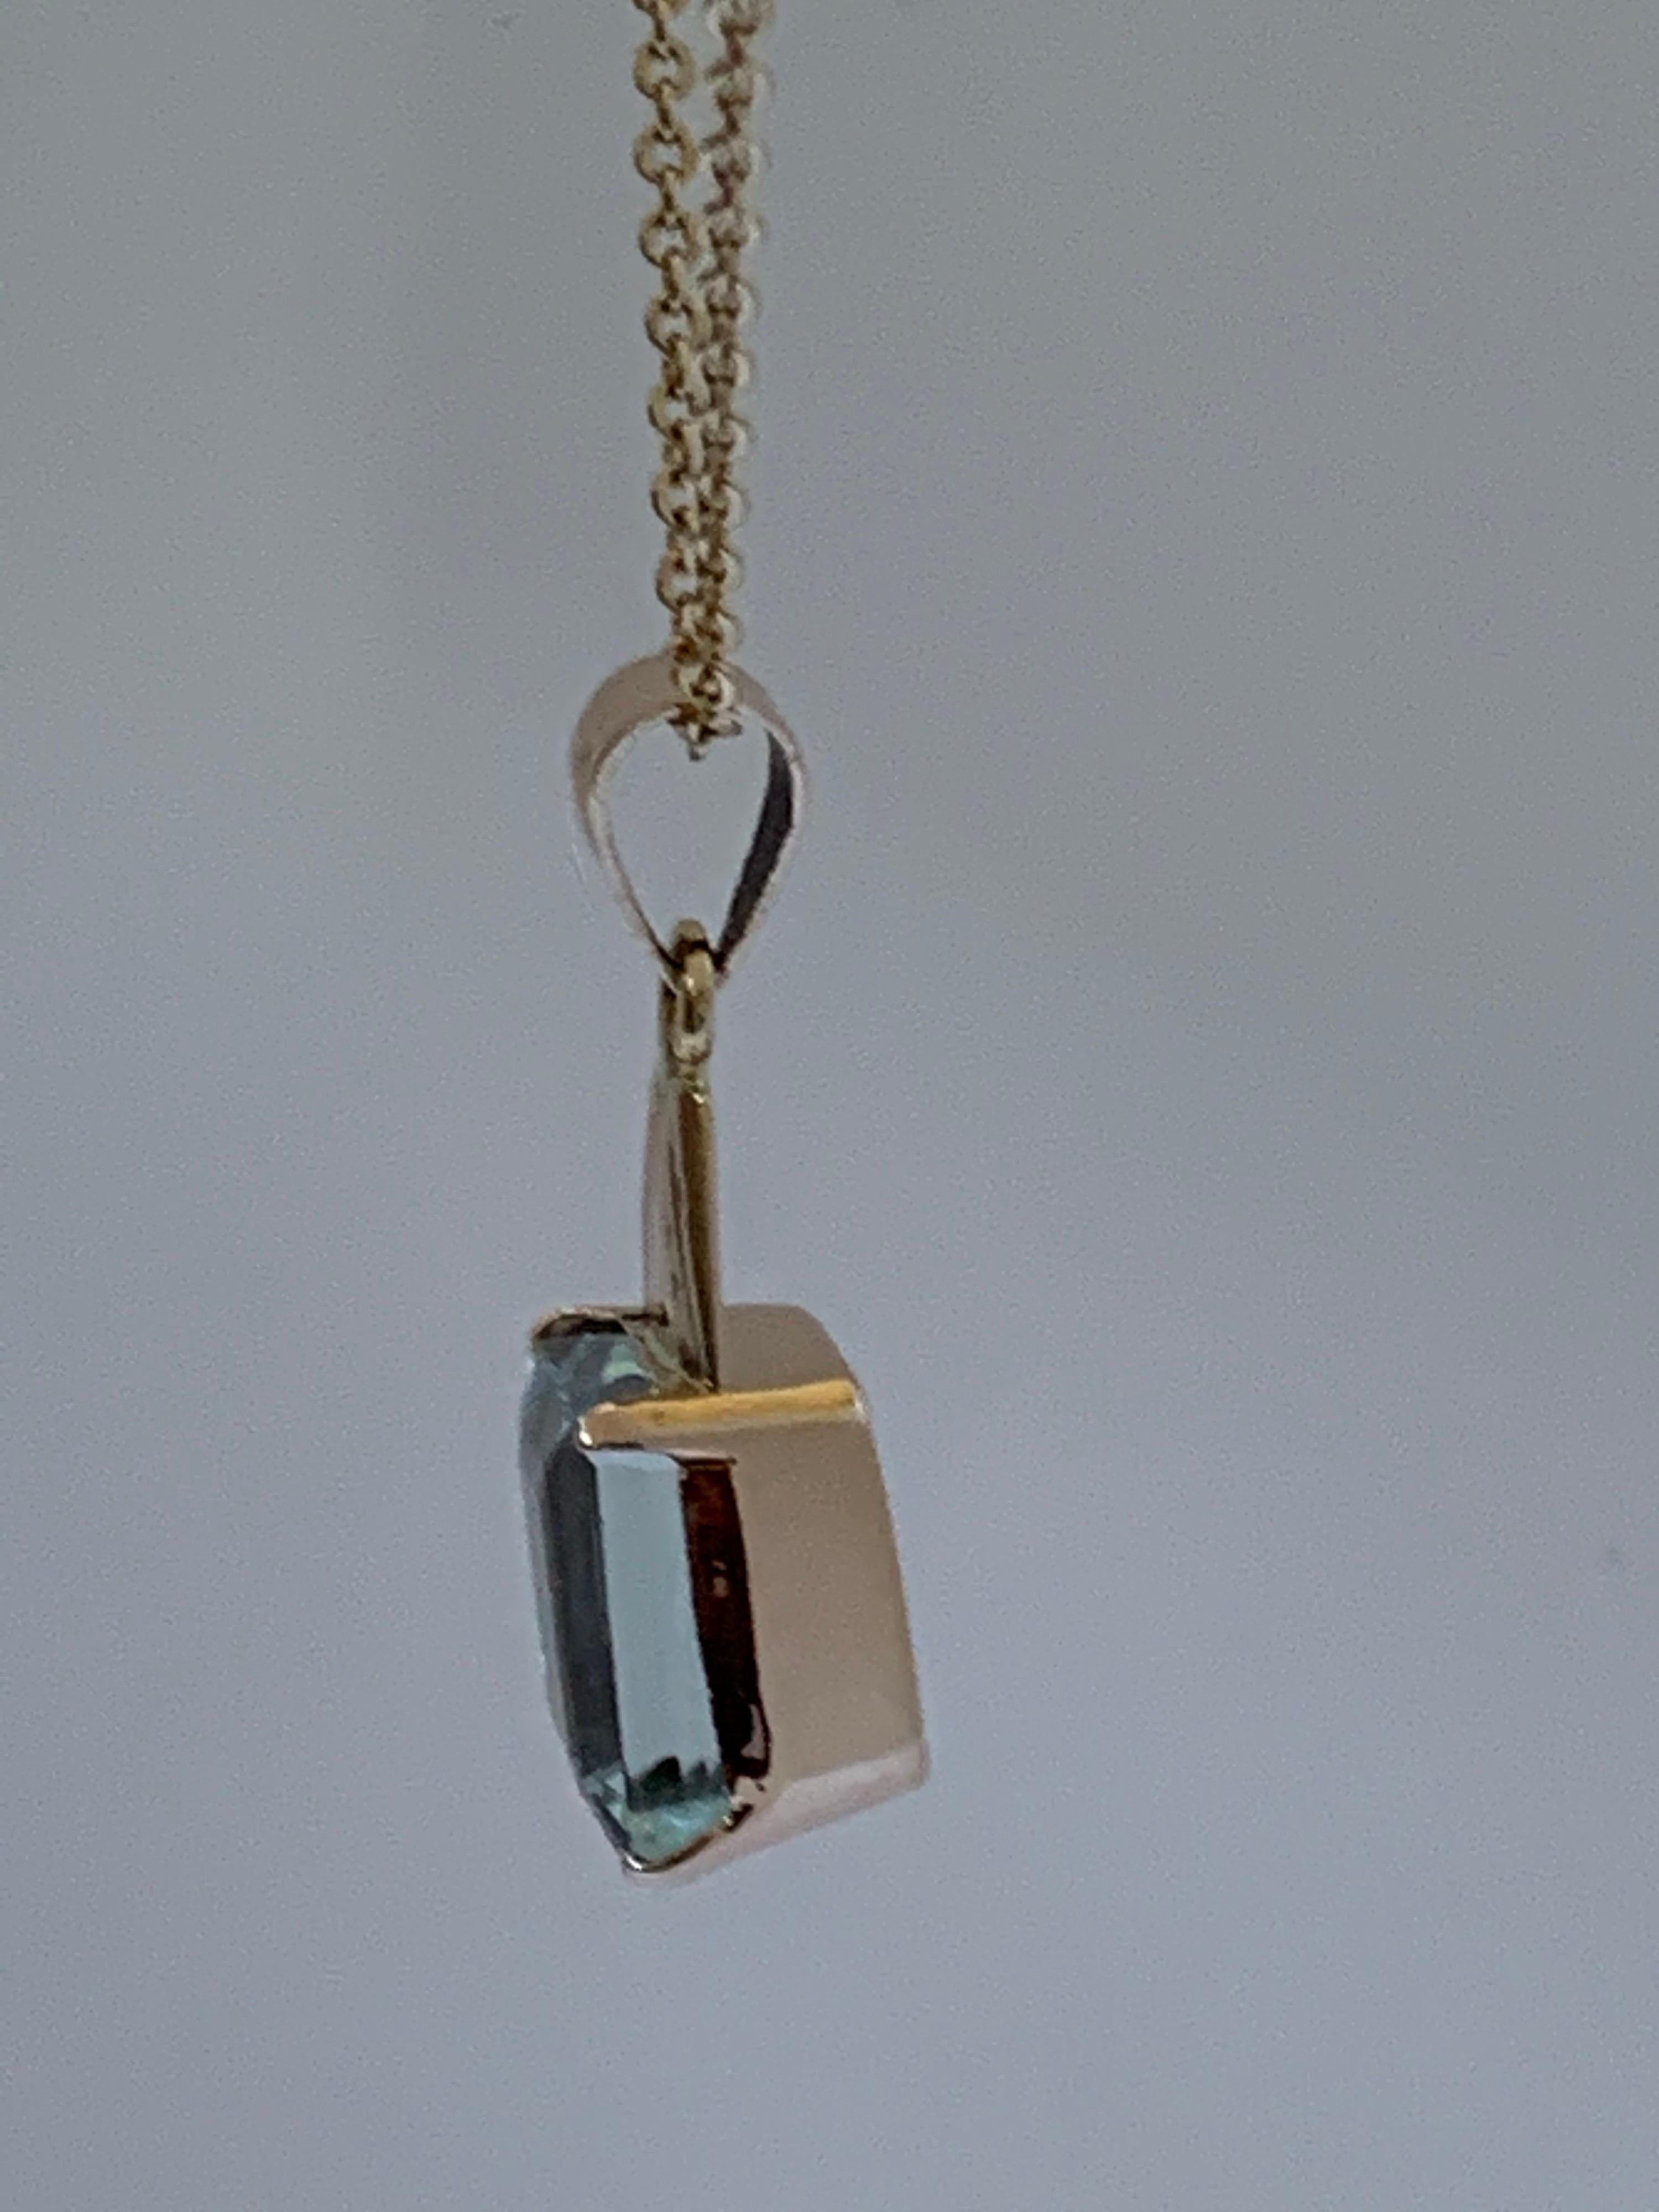 Natural Rectangular Aquamarine is 8 mm X 10 mm set in 14 Karat Yellow Gold is one of a kind handcrafted Pendant. The stone also hand cut and polished. 